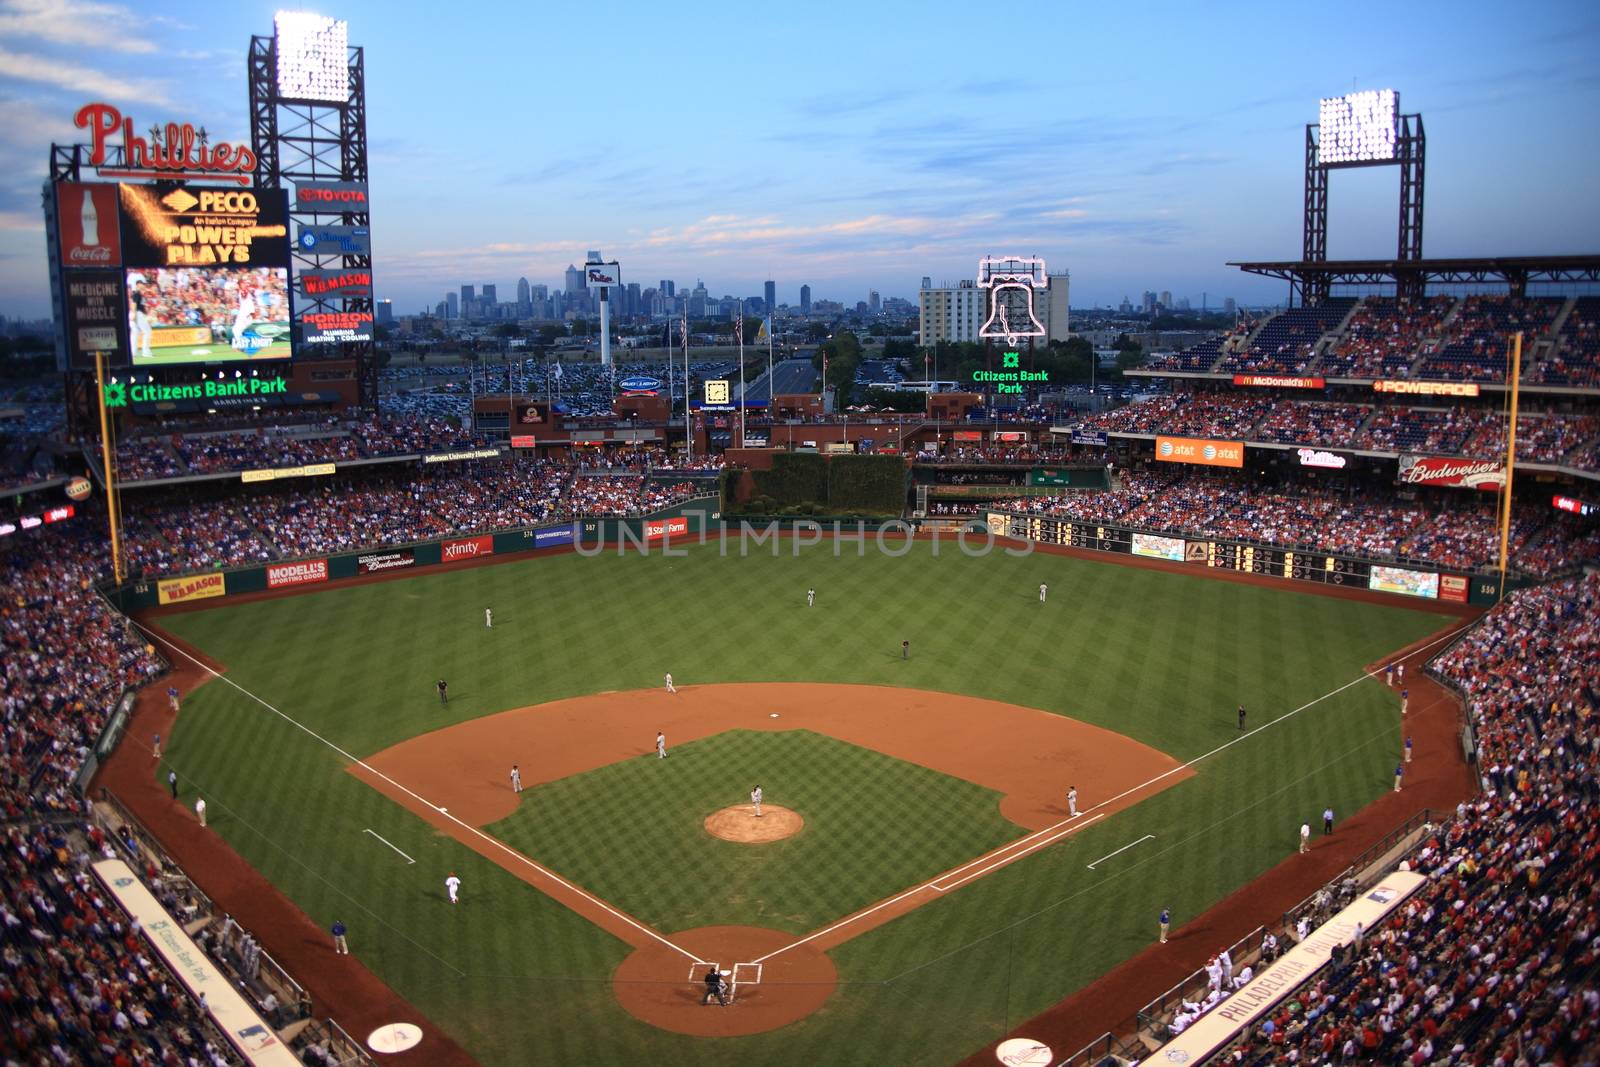 A night game against the Florida Marlins at Citizens Bank Park, home of the Philadelphia Phillies.